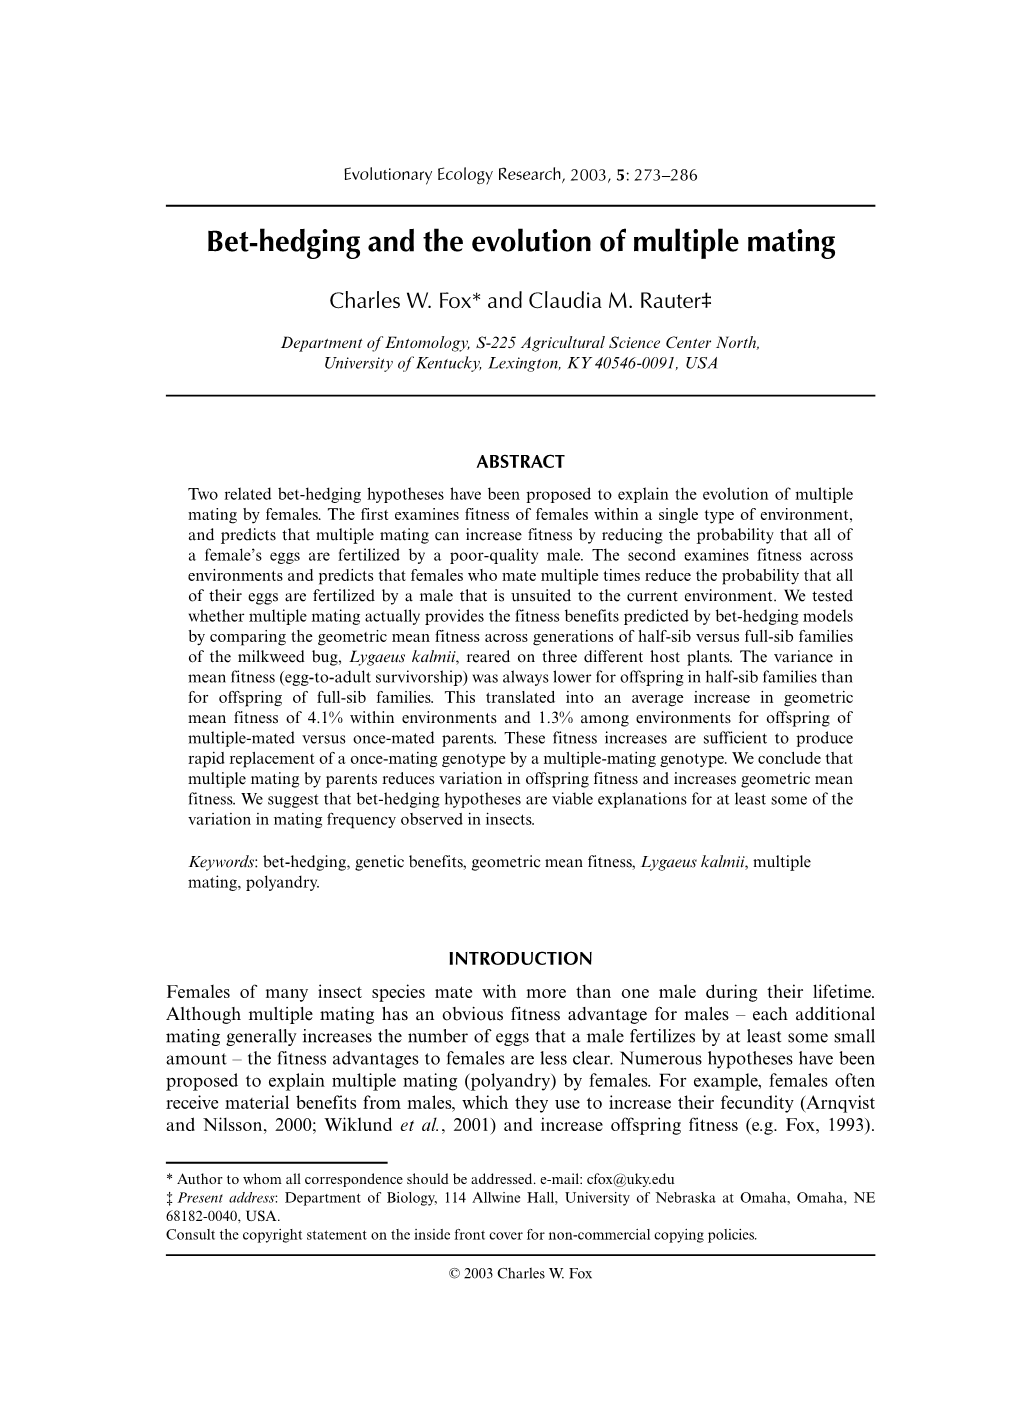 Bet-Hedging and the Evolution of Multiple Mating